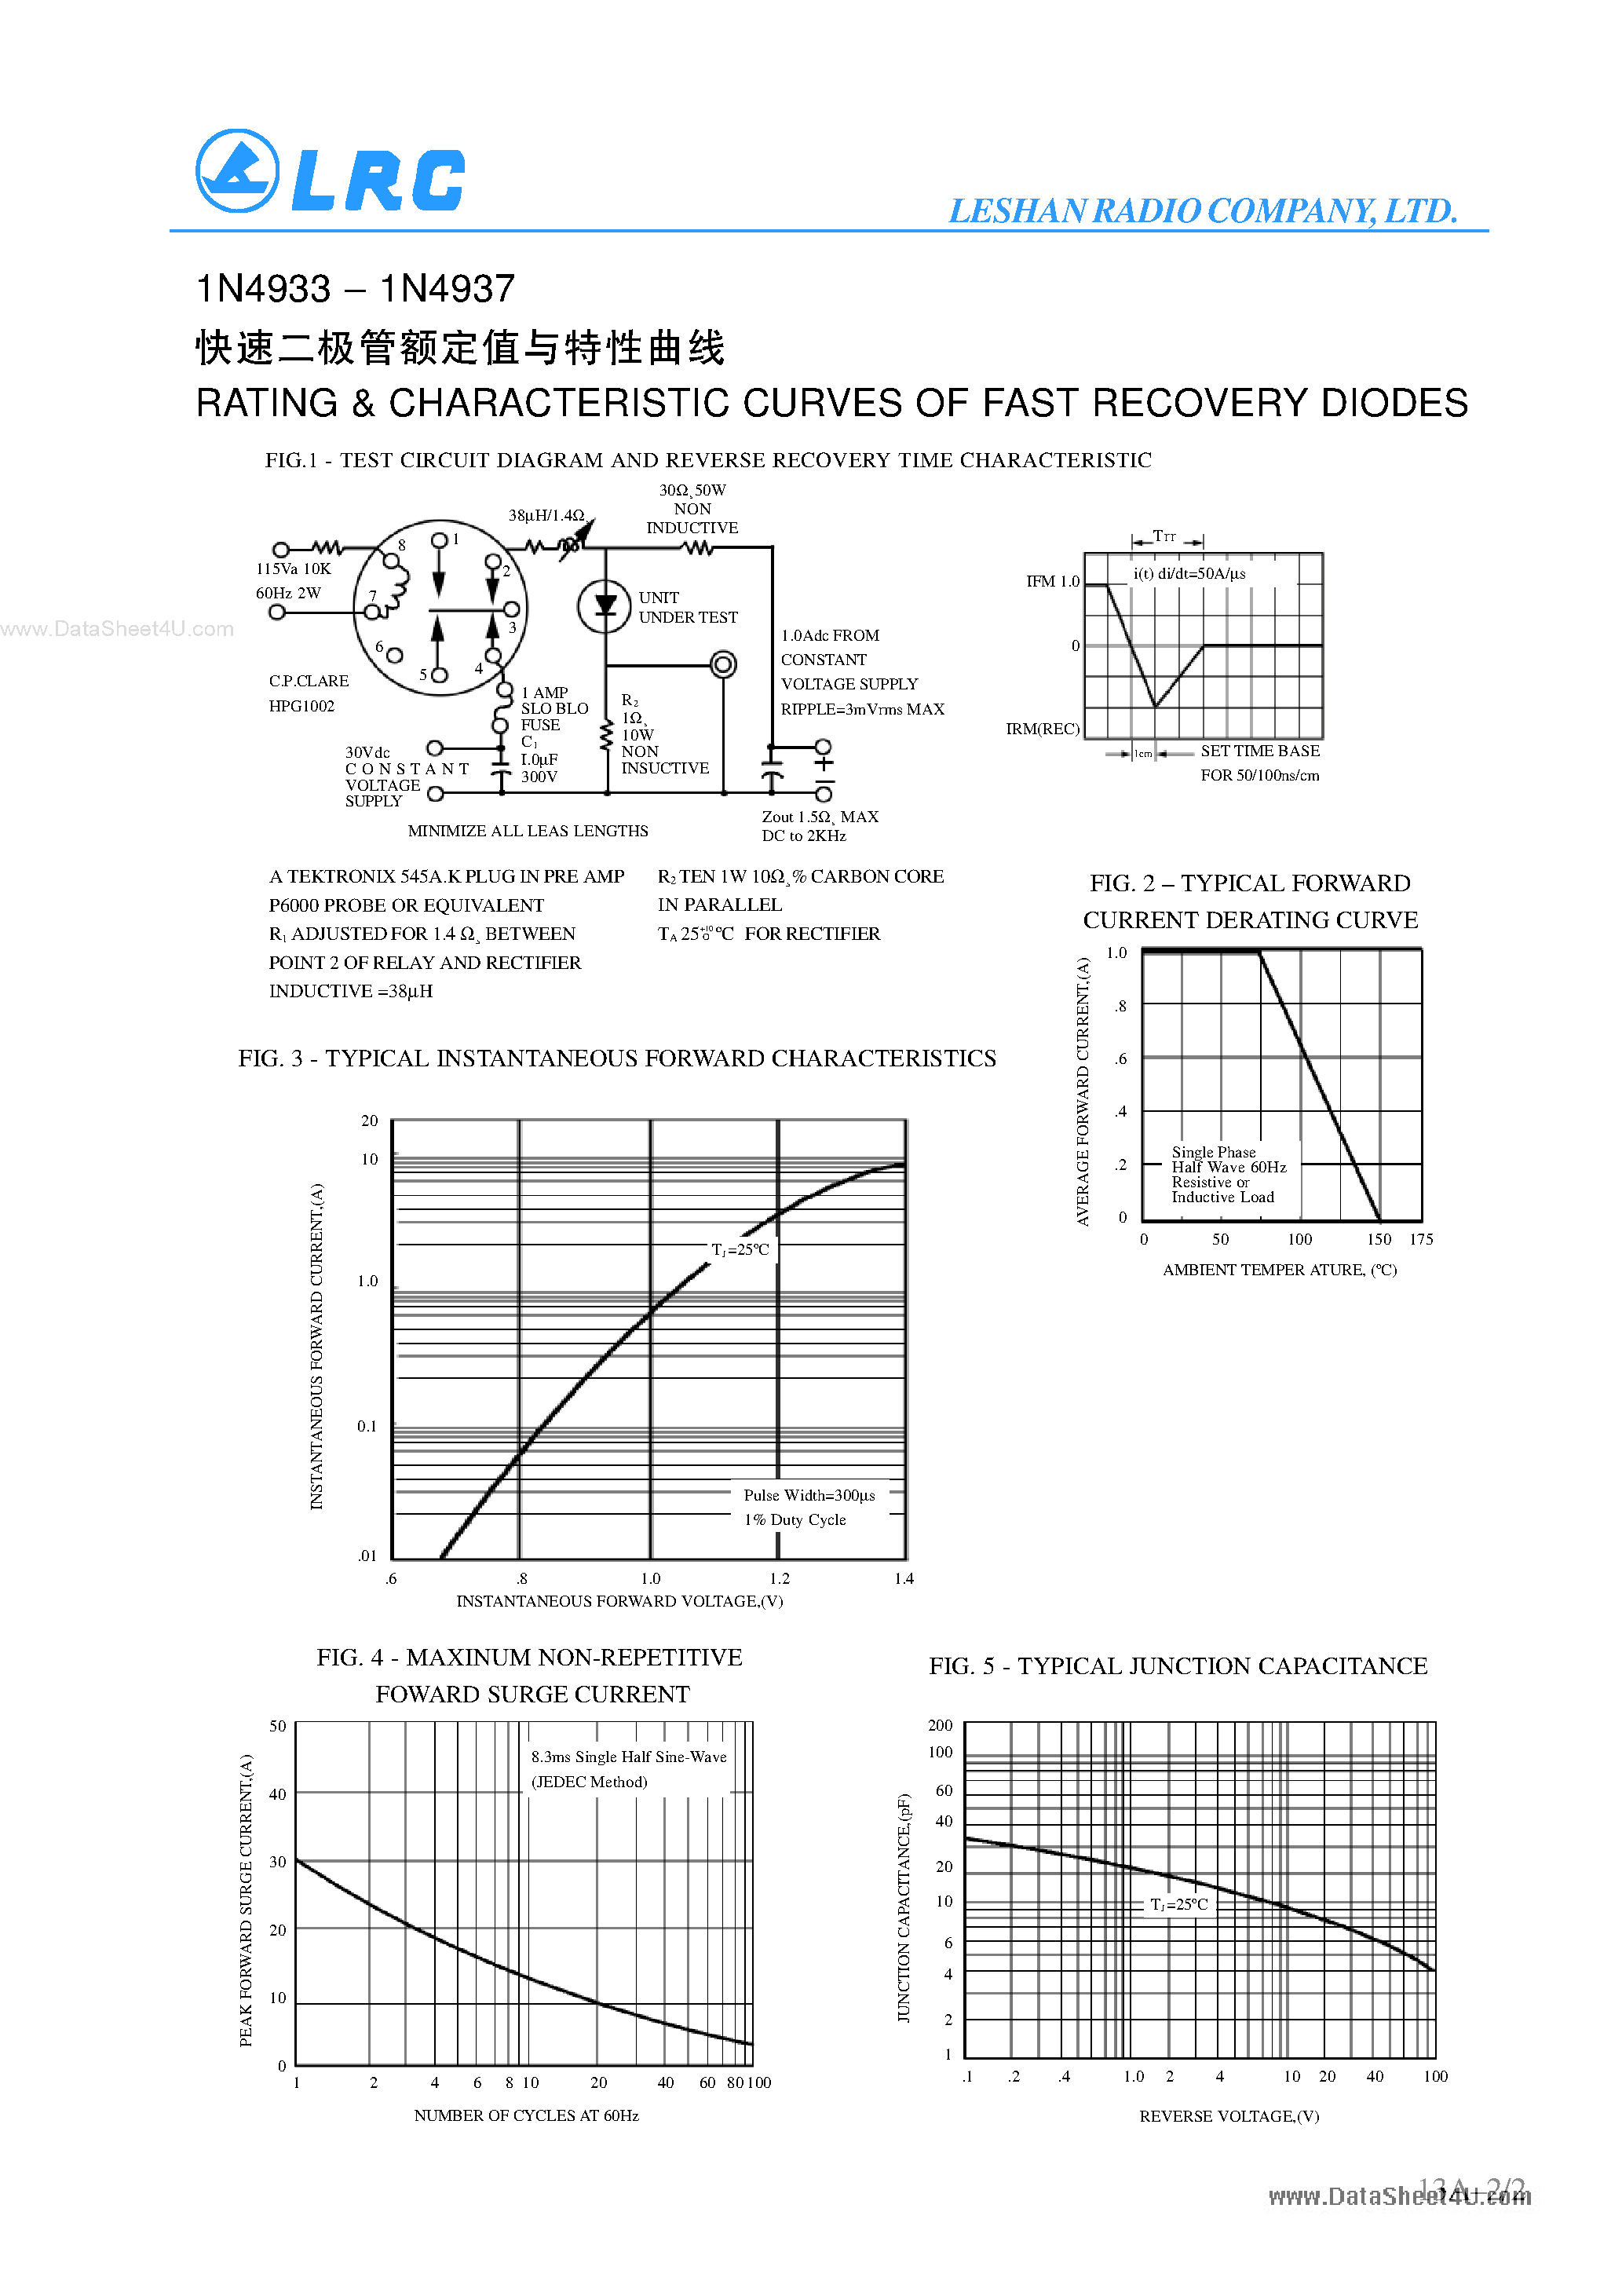 Datasheet IN4933 - (IN4933 - IN4937) 1A FAST RECOVERY DIODES page 2